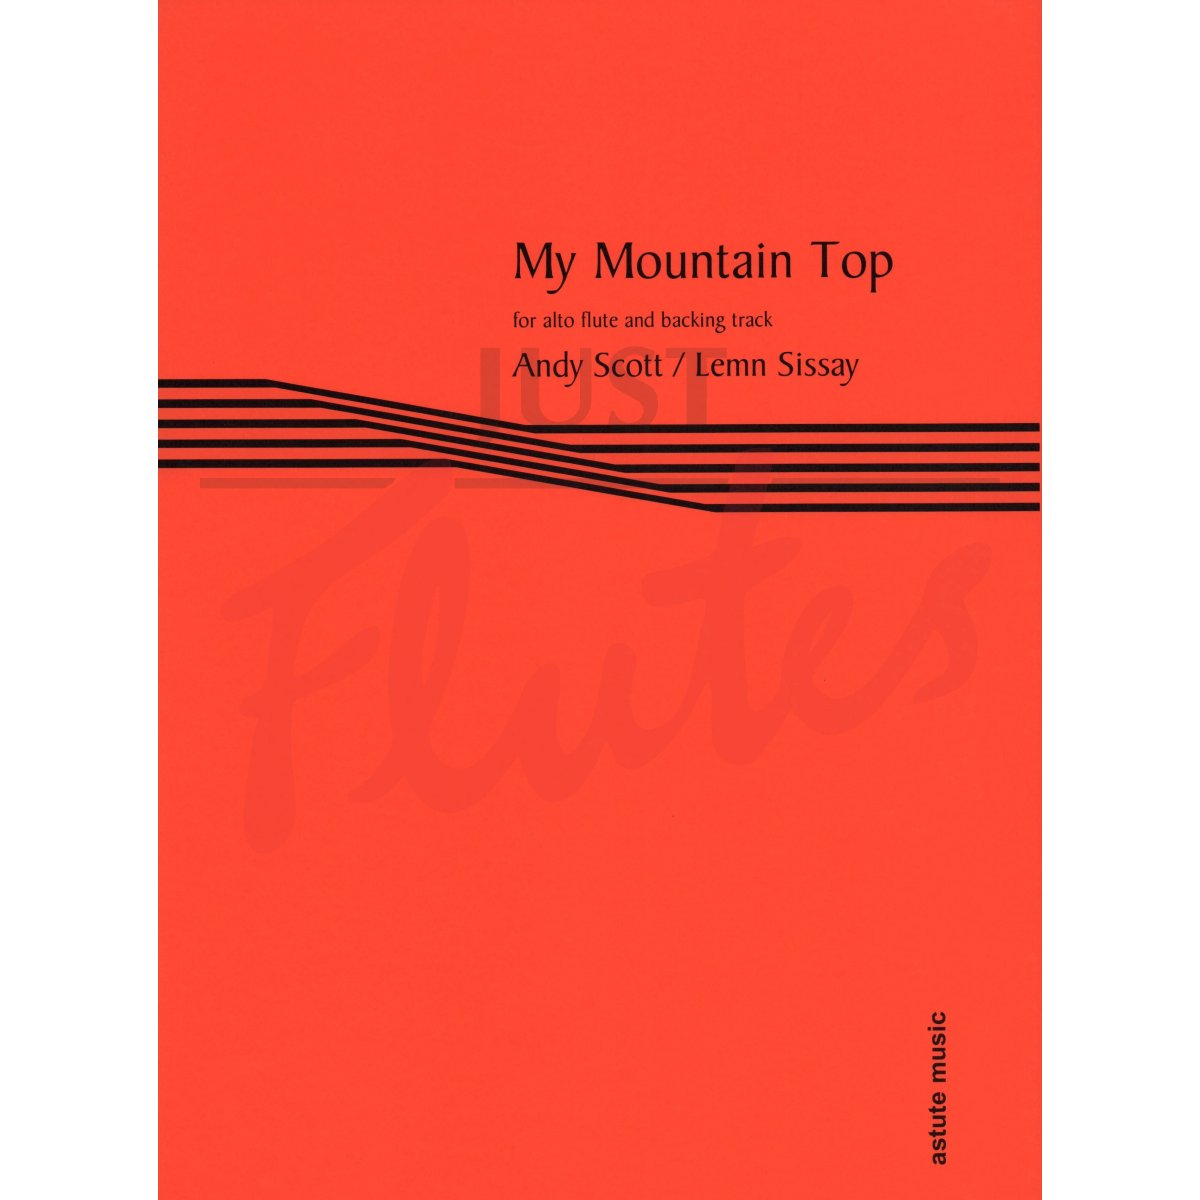 My Mountain Top for Alto Flute and Backing Track